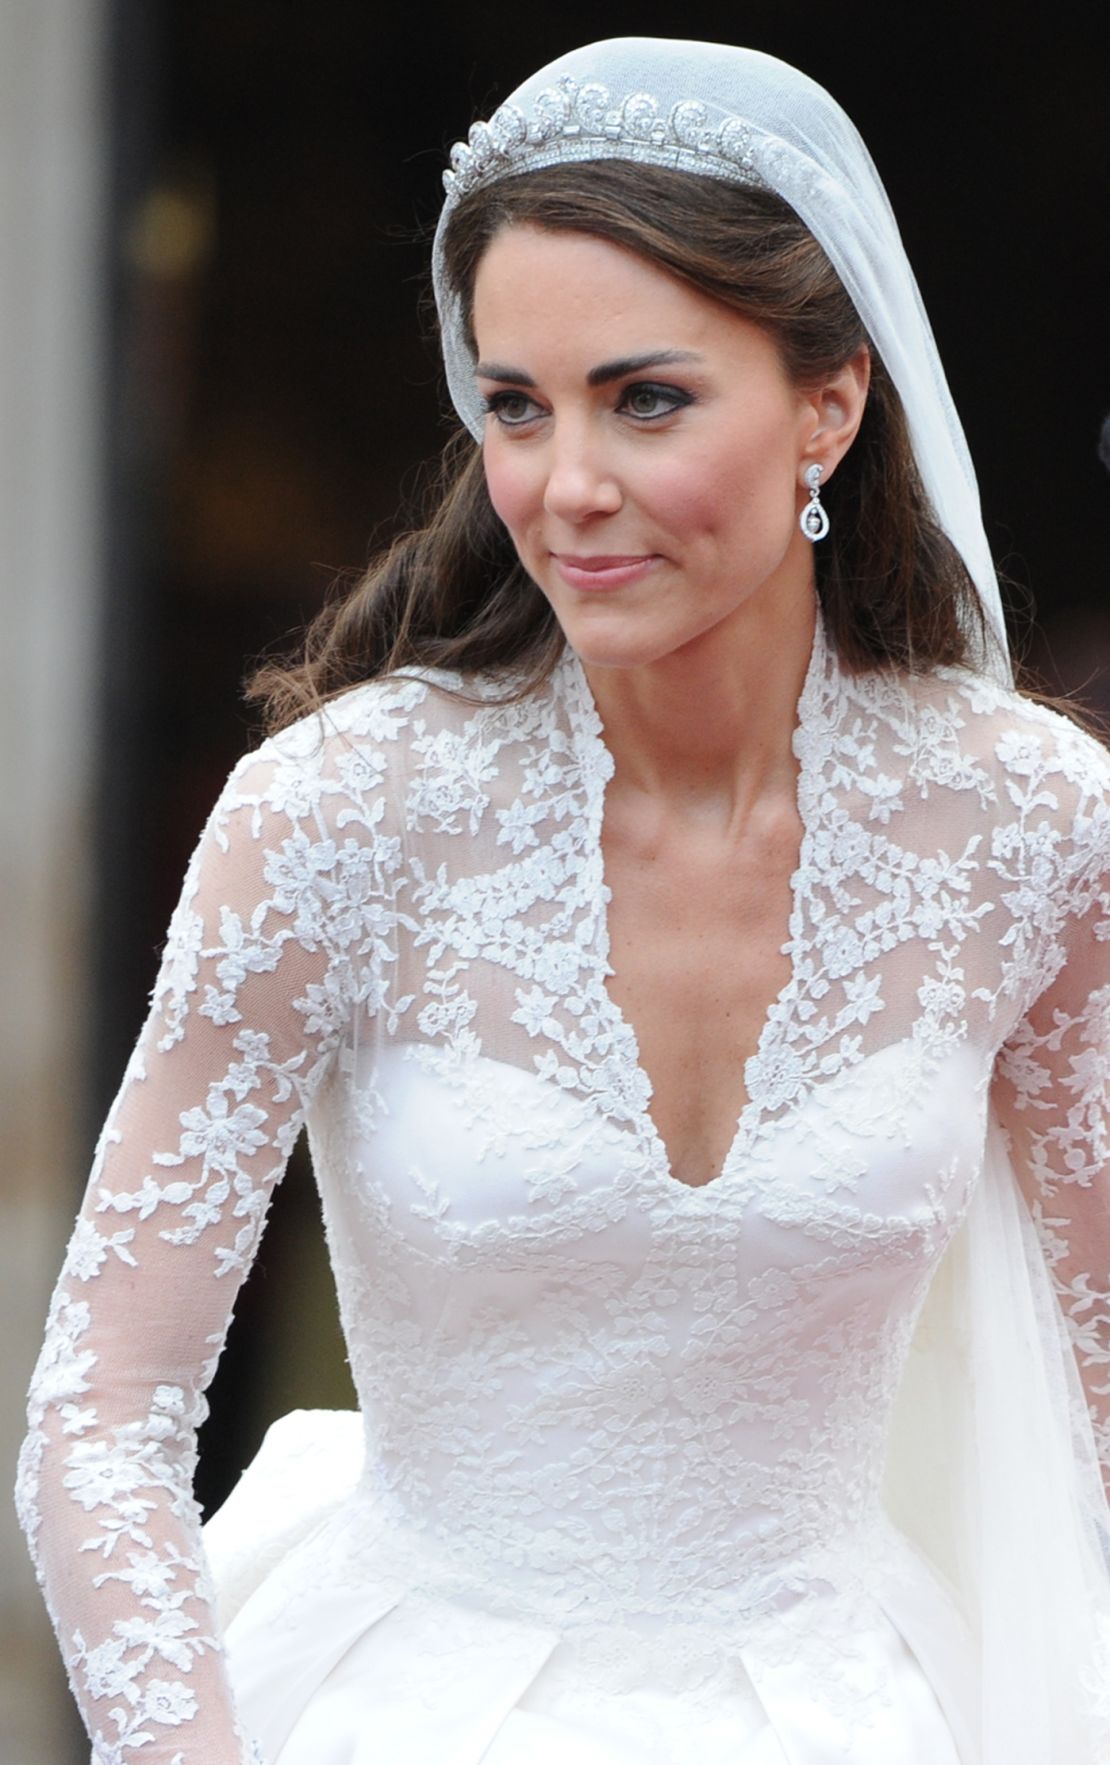 Why so many brides wear white on their wedding day